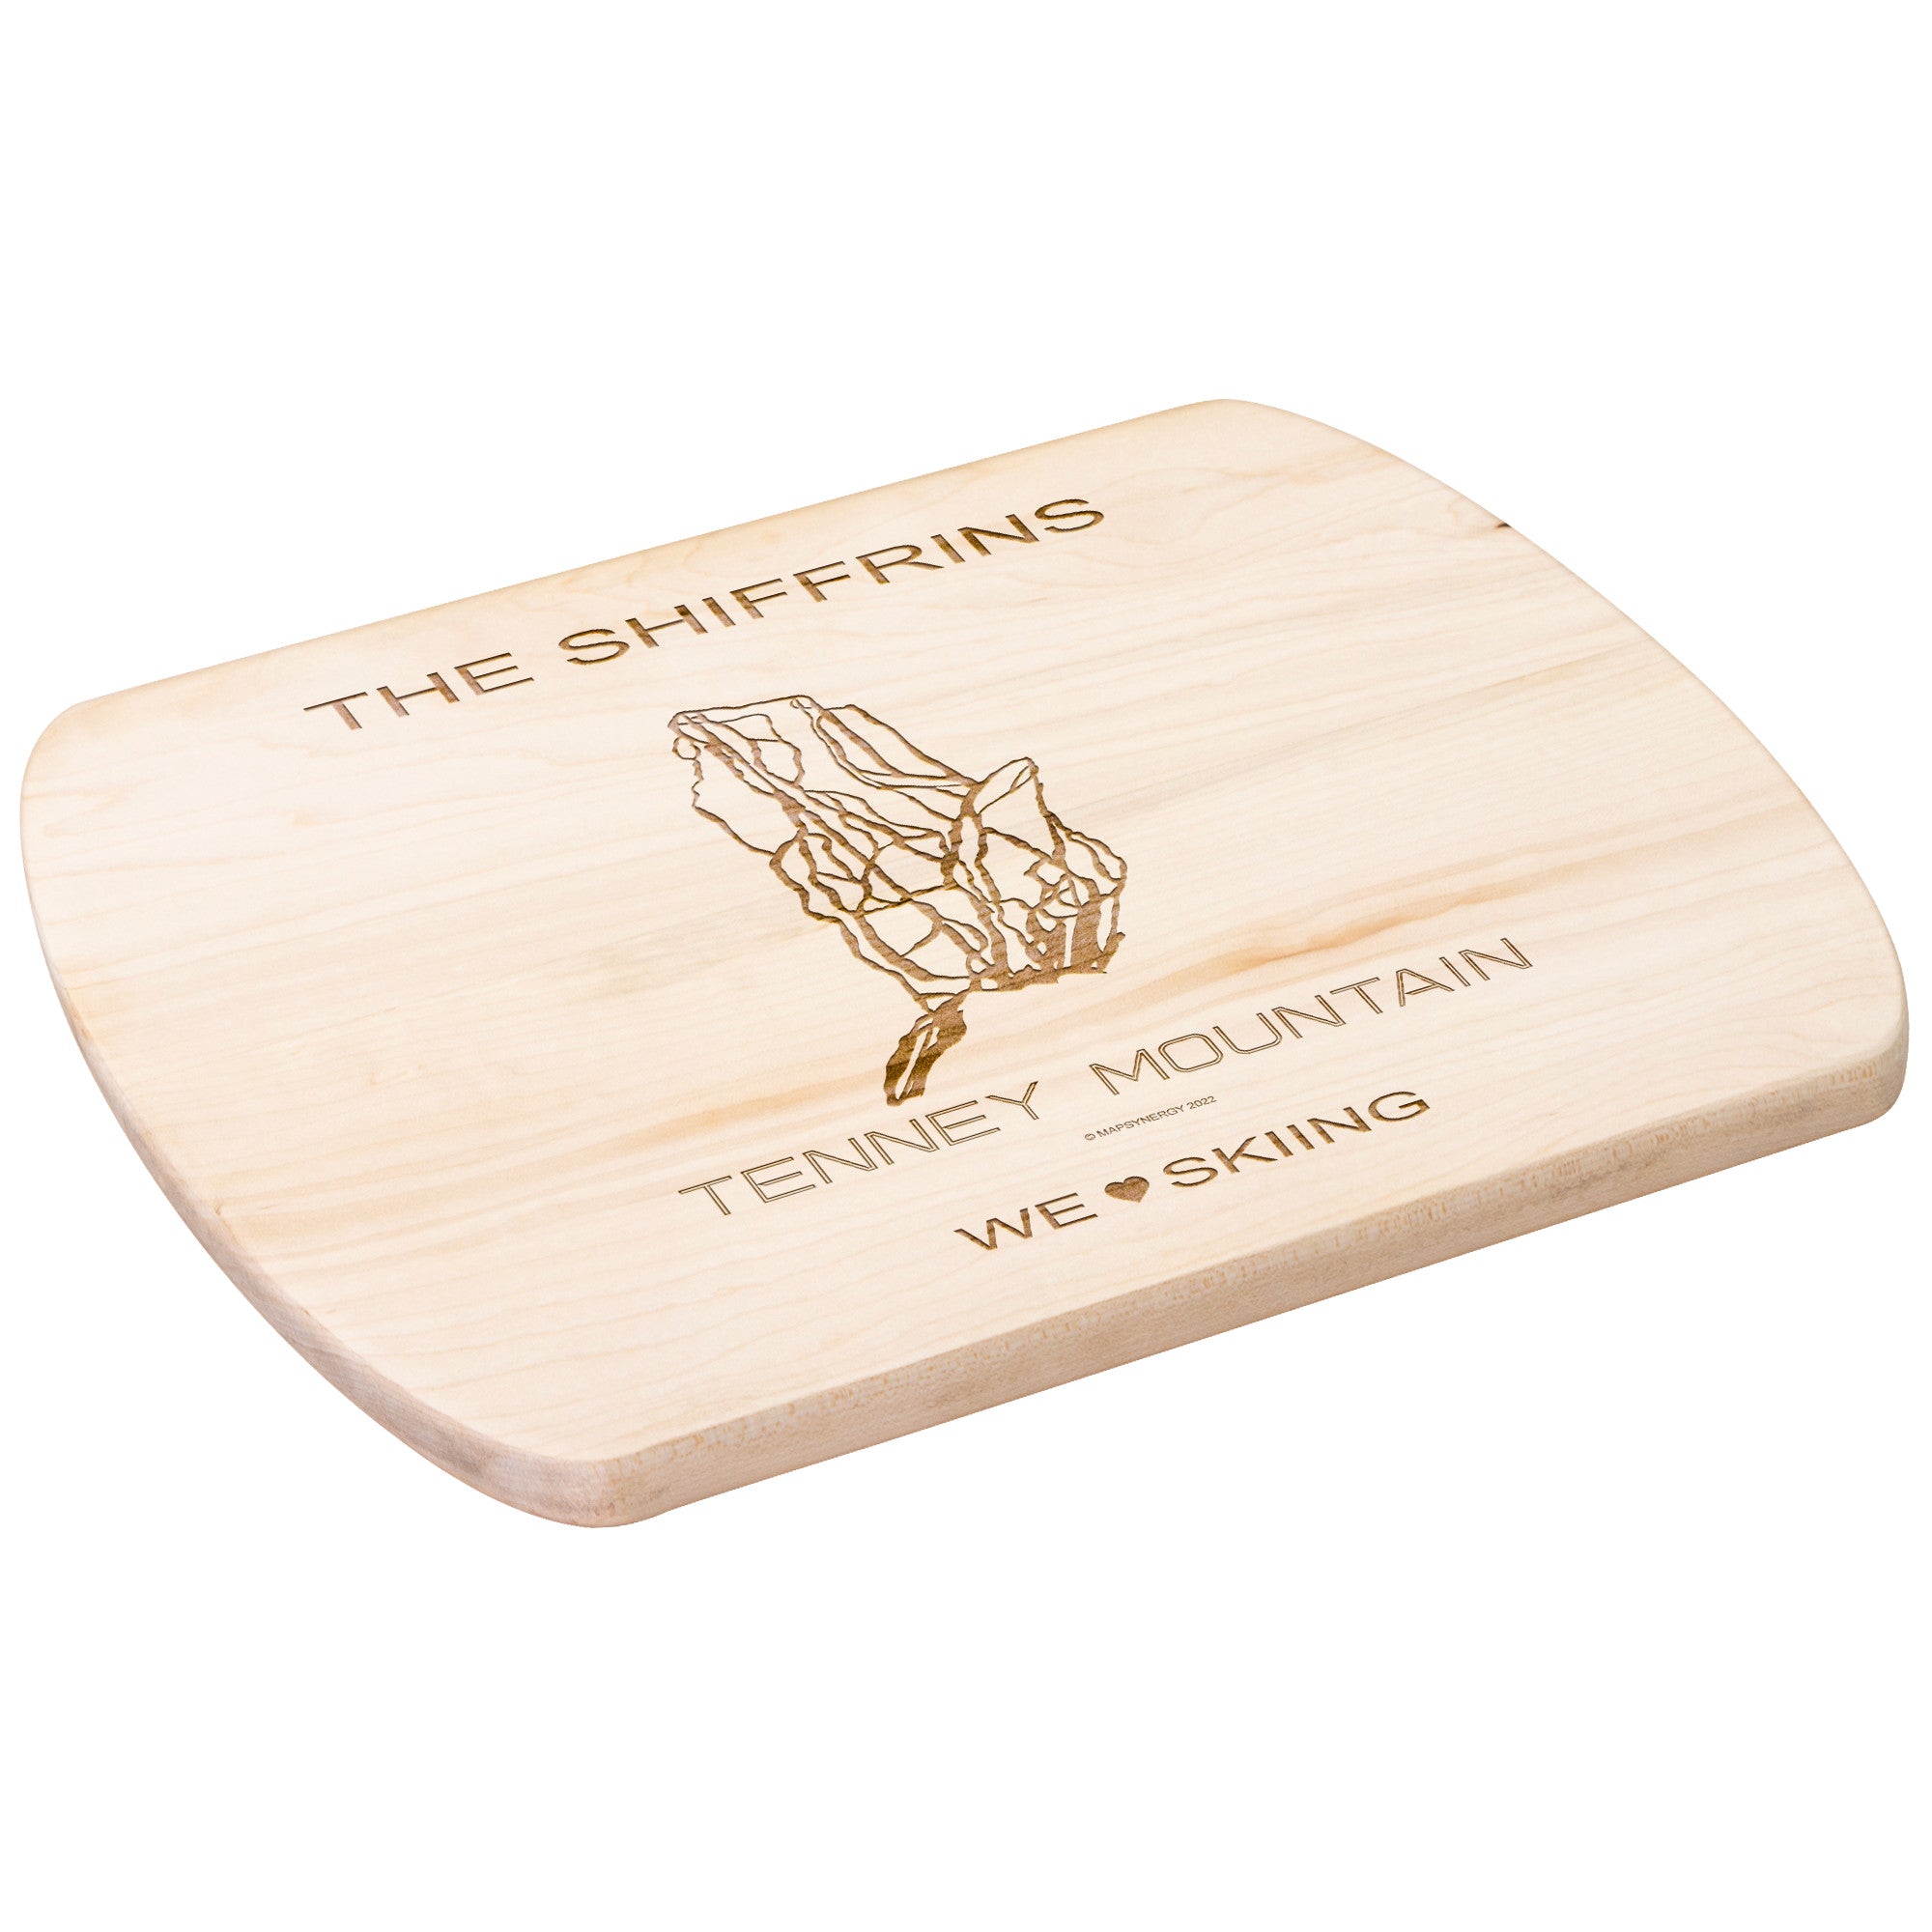 PERSONALIZED  Tenney Mountain, New Hampshire SKI TRAIL MAP CUTTING BOARD